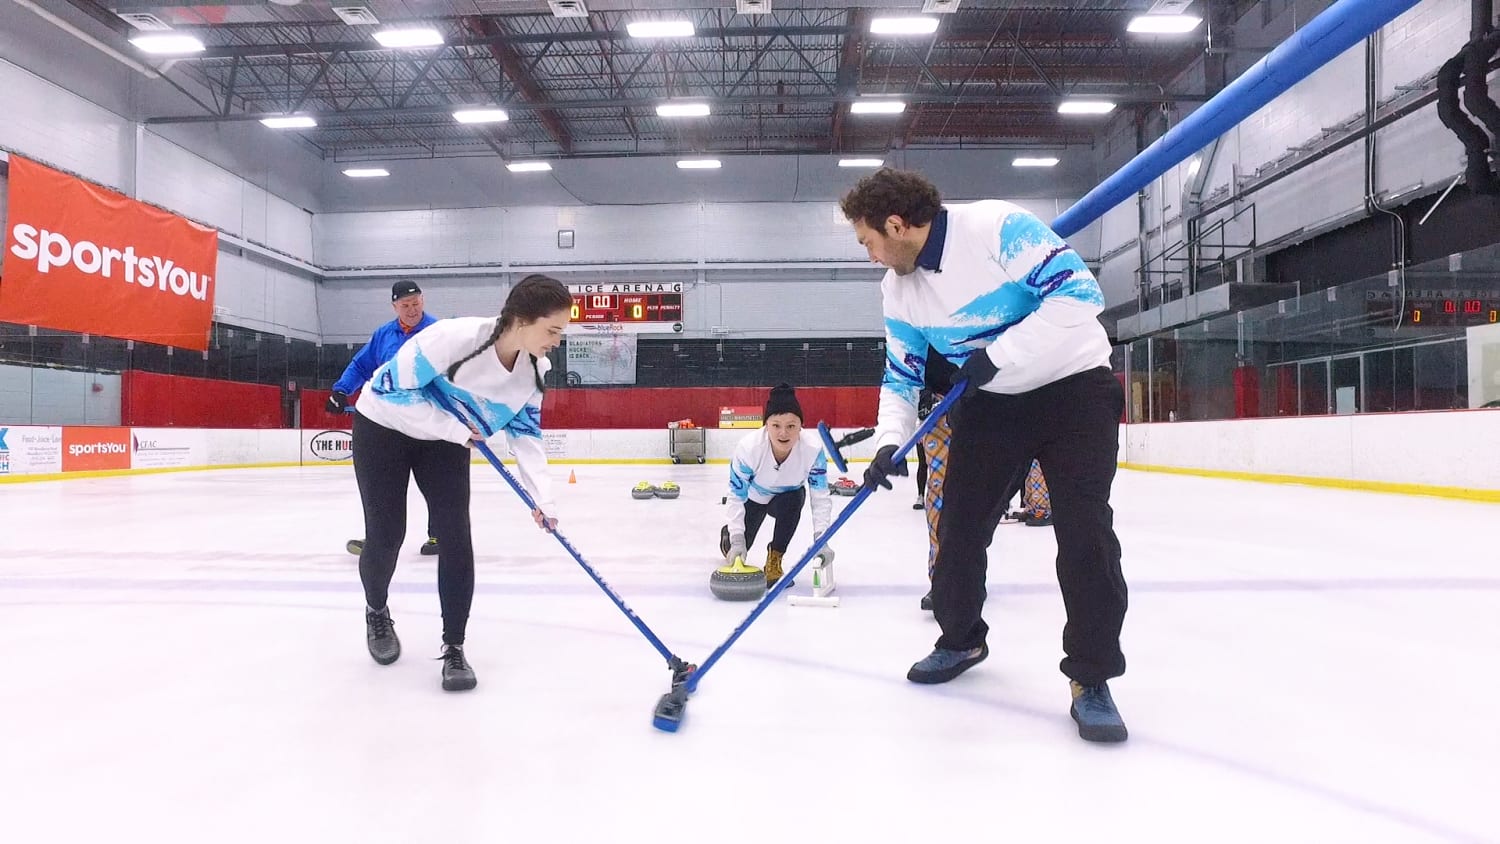 Curling, the Olympic sport you need to know more about